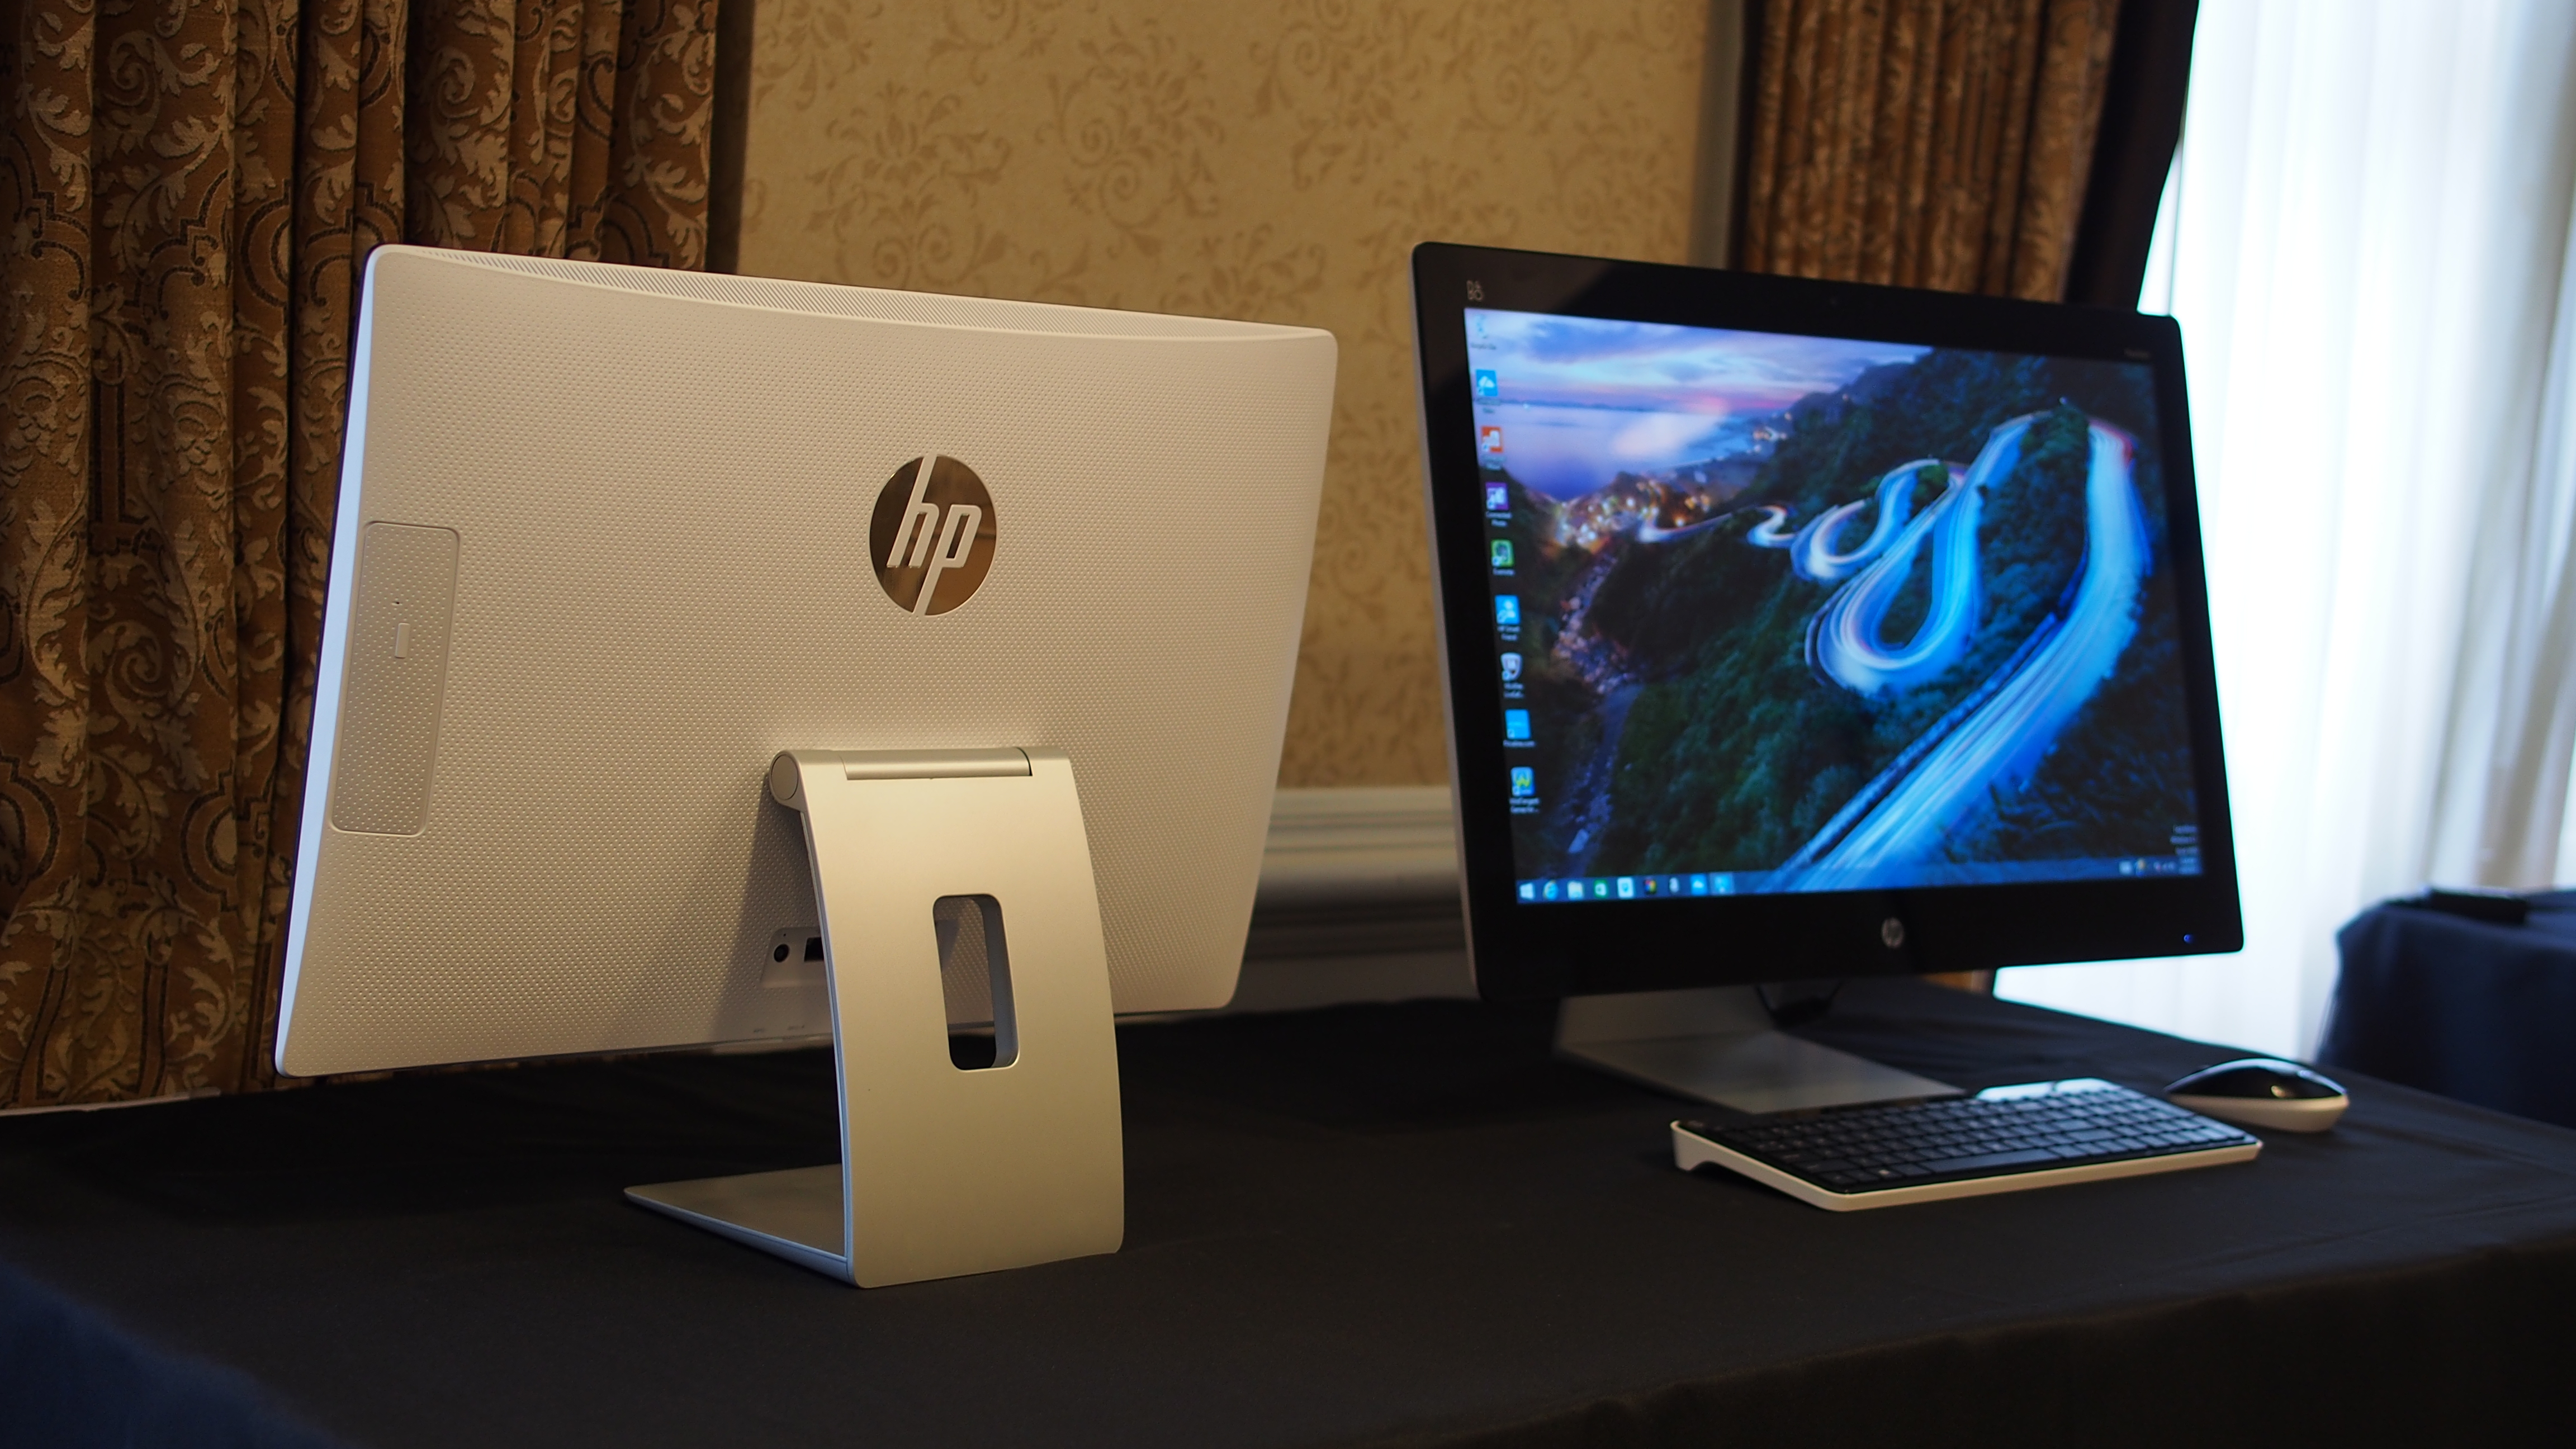 Hands On Hp Pavilion All In One Review Techradar